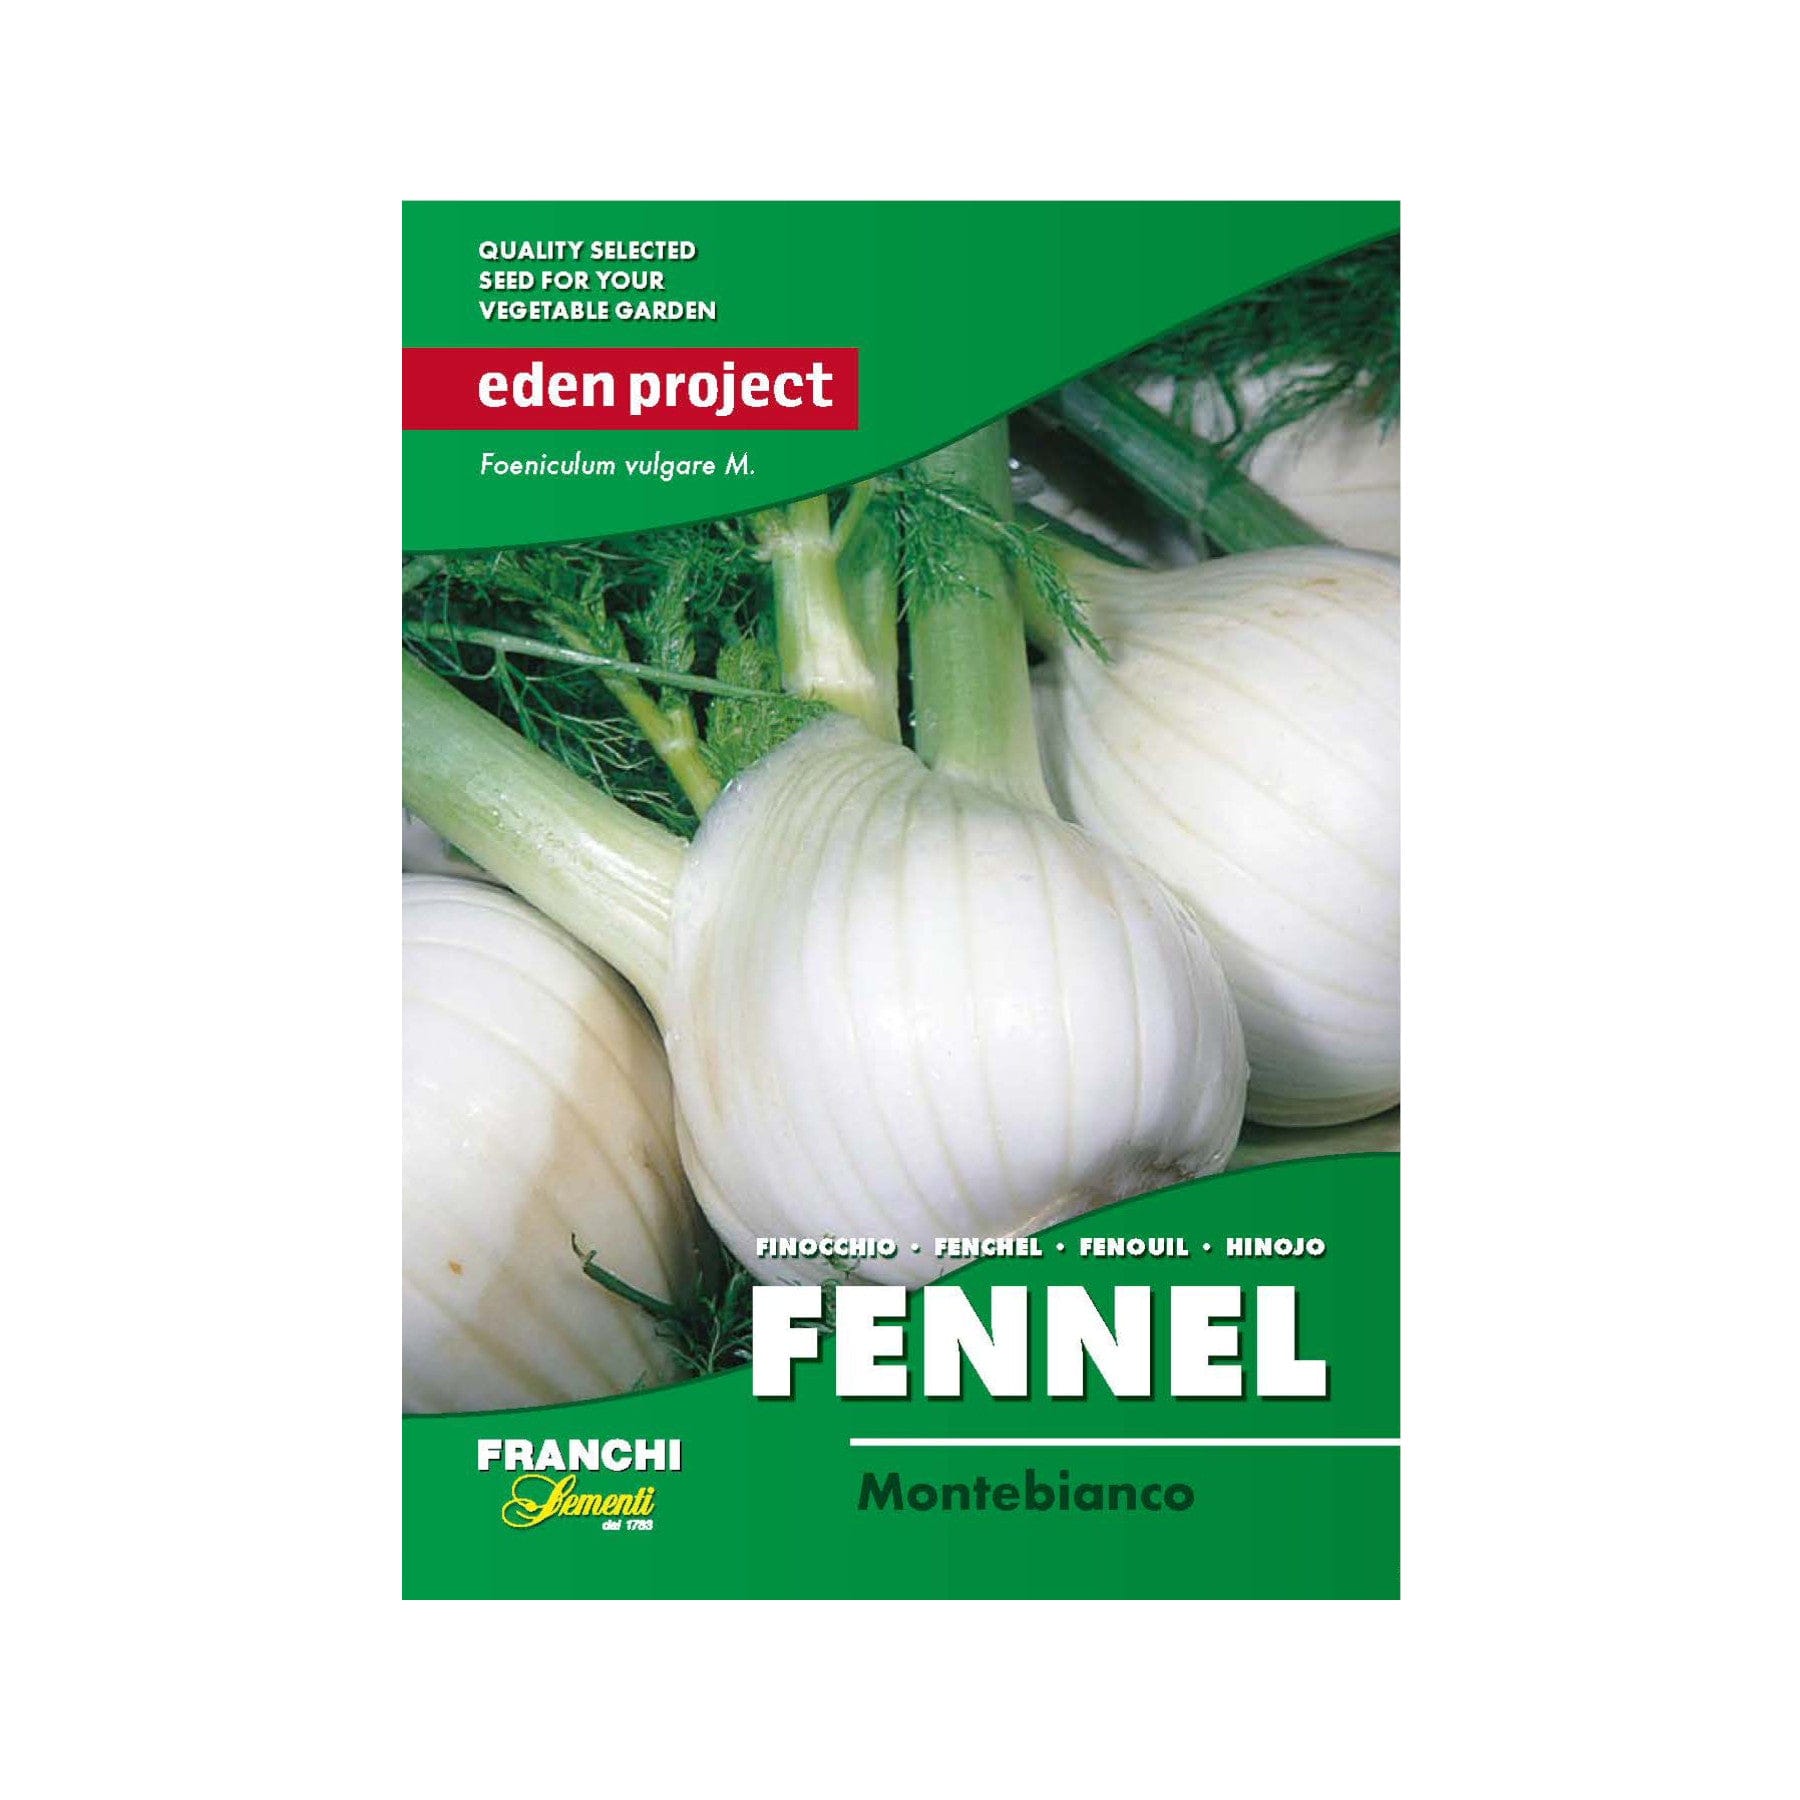 Eden Project quality selected fennel seed packet for vegetable garden by Franchi Sementi, Montebianco variety, Foeniculum vulgare, fresh fennel bulbs with green stems.